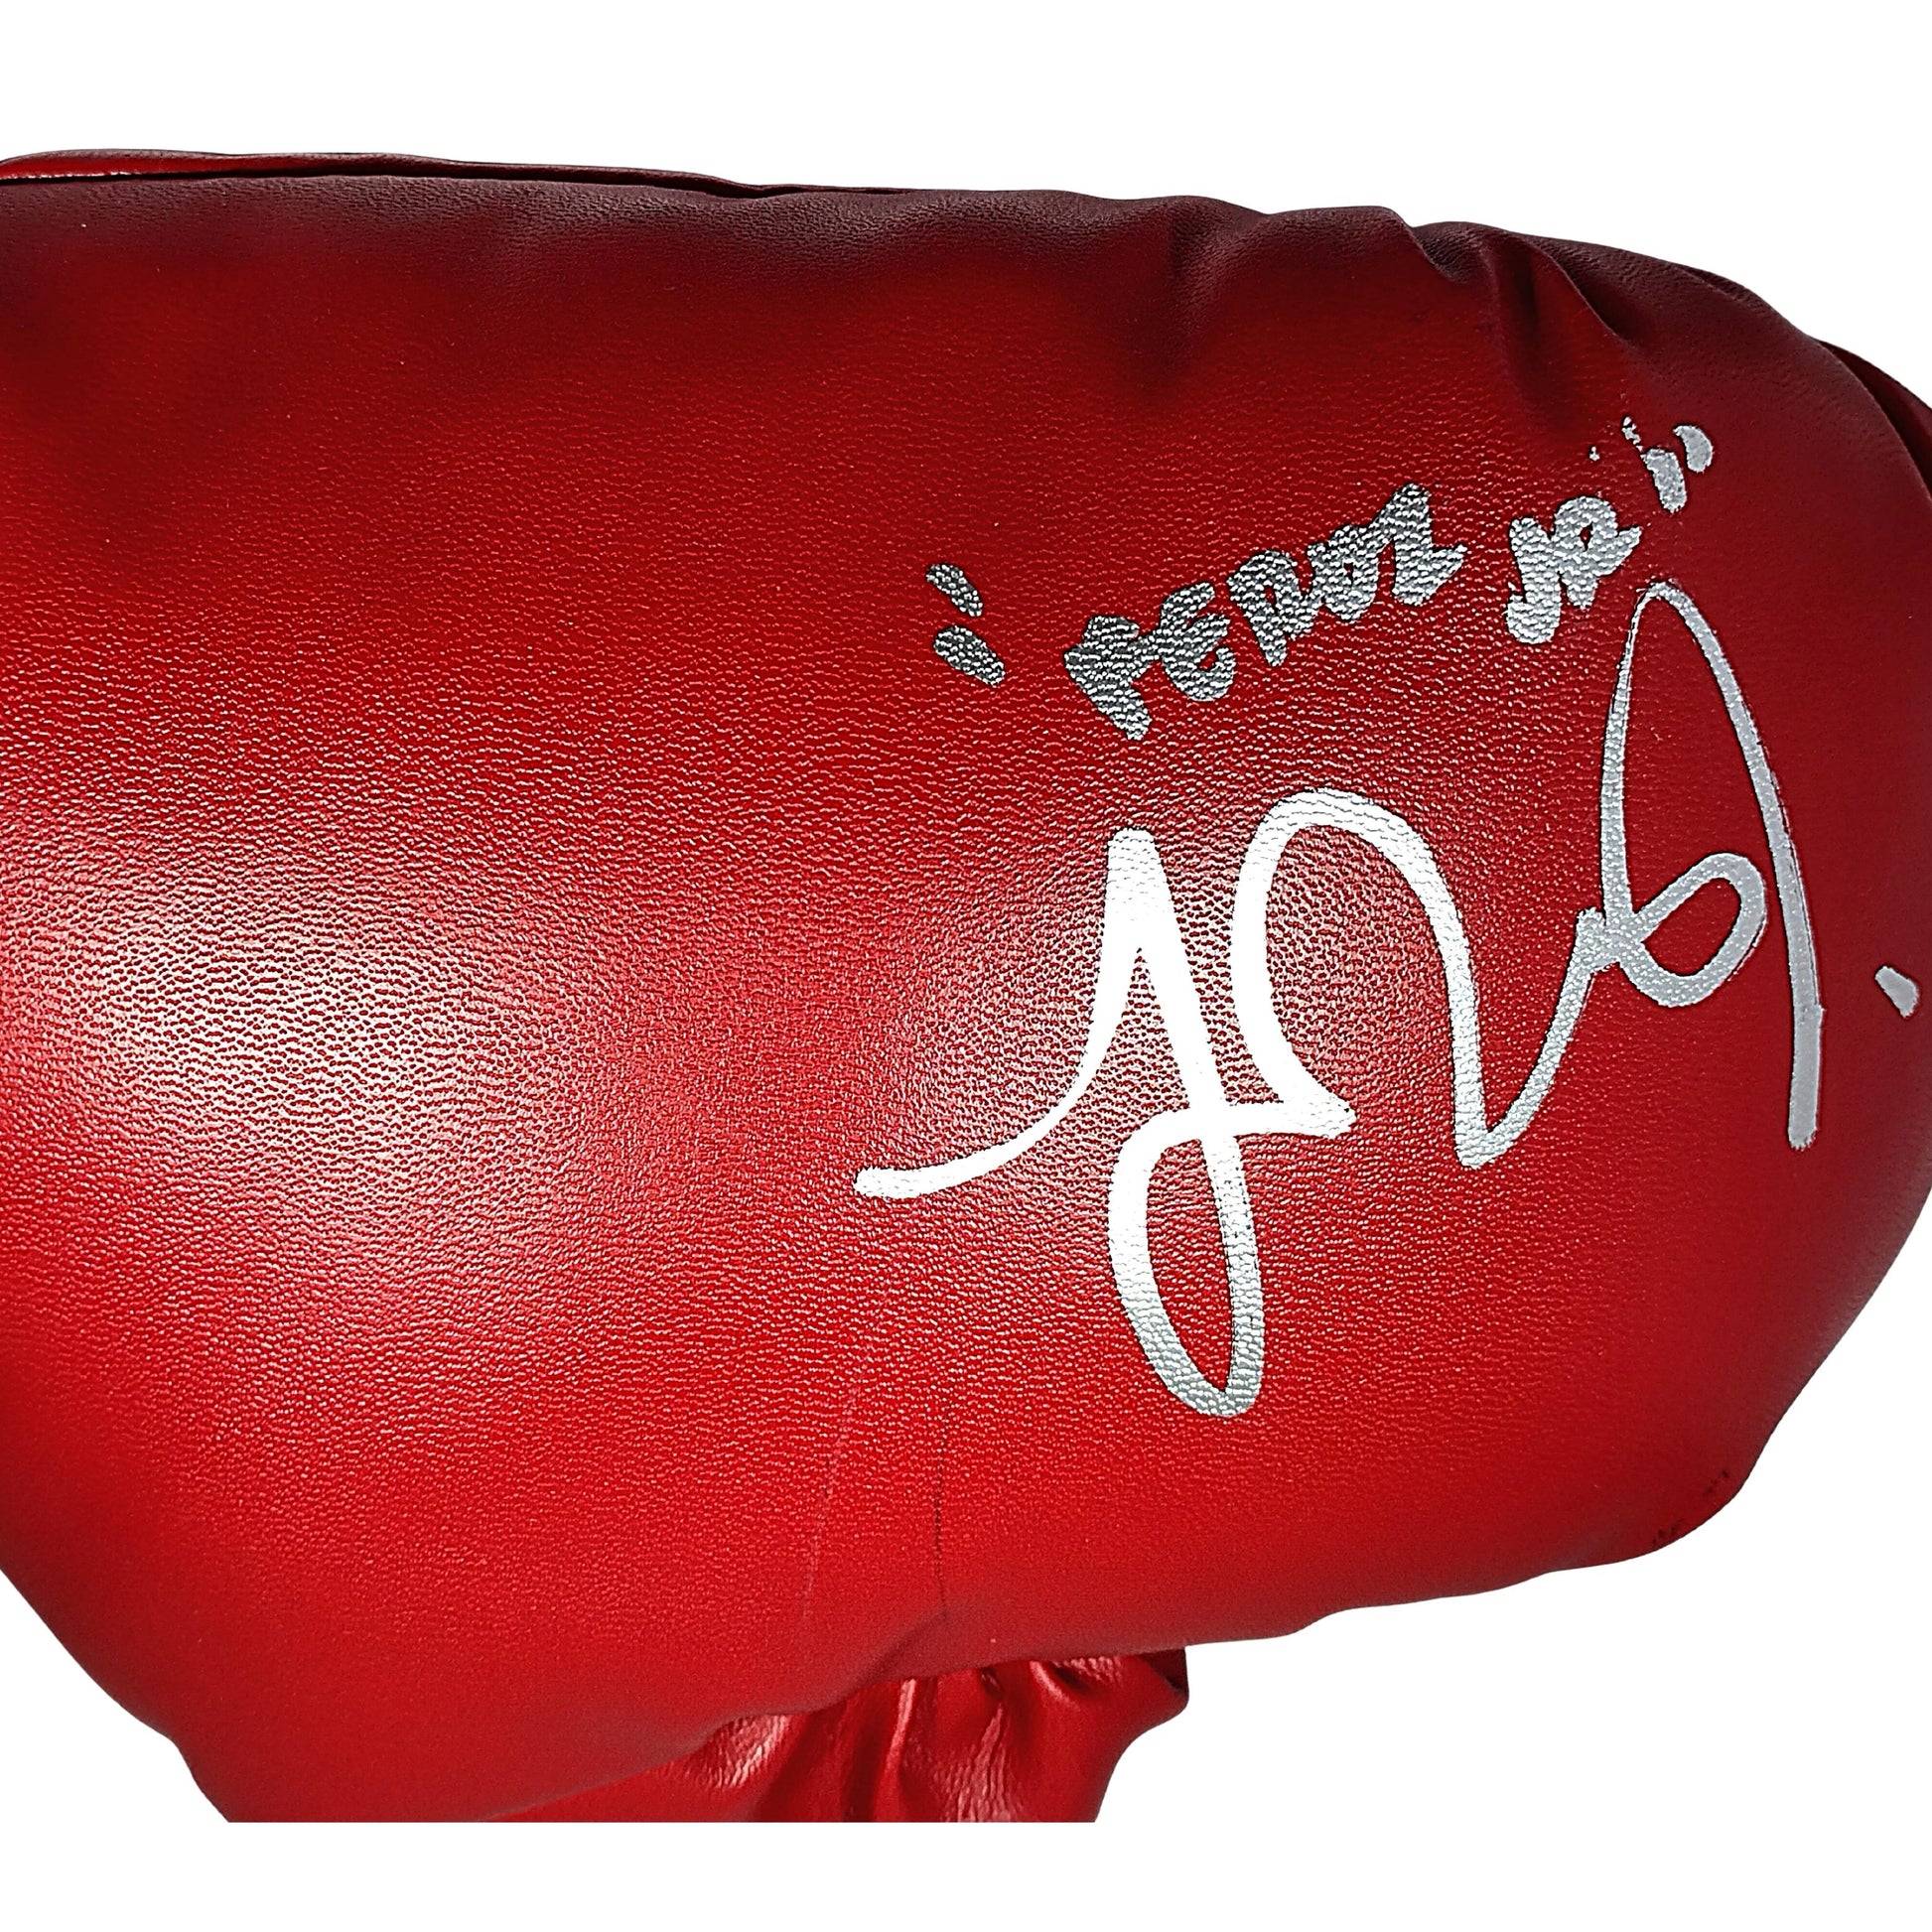 Boxing Gloves- Autographed- Fernando Vargas Jr Signed Red Everlast Boxing Glove Exact Proof Photo Beckett Certified Authentic 302